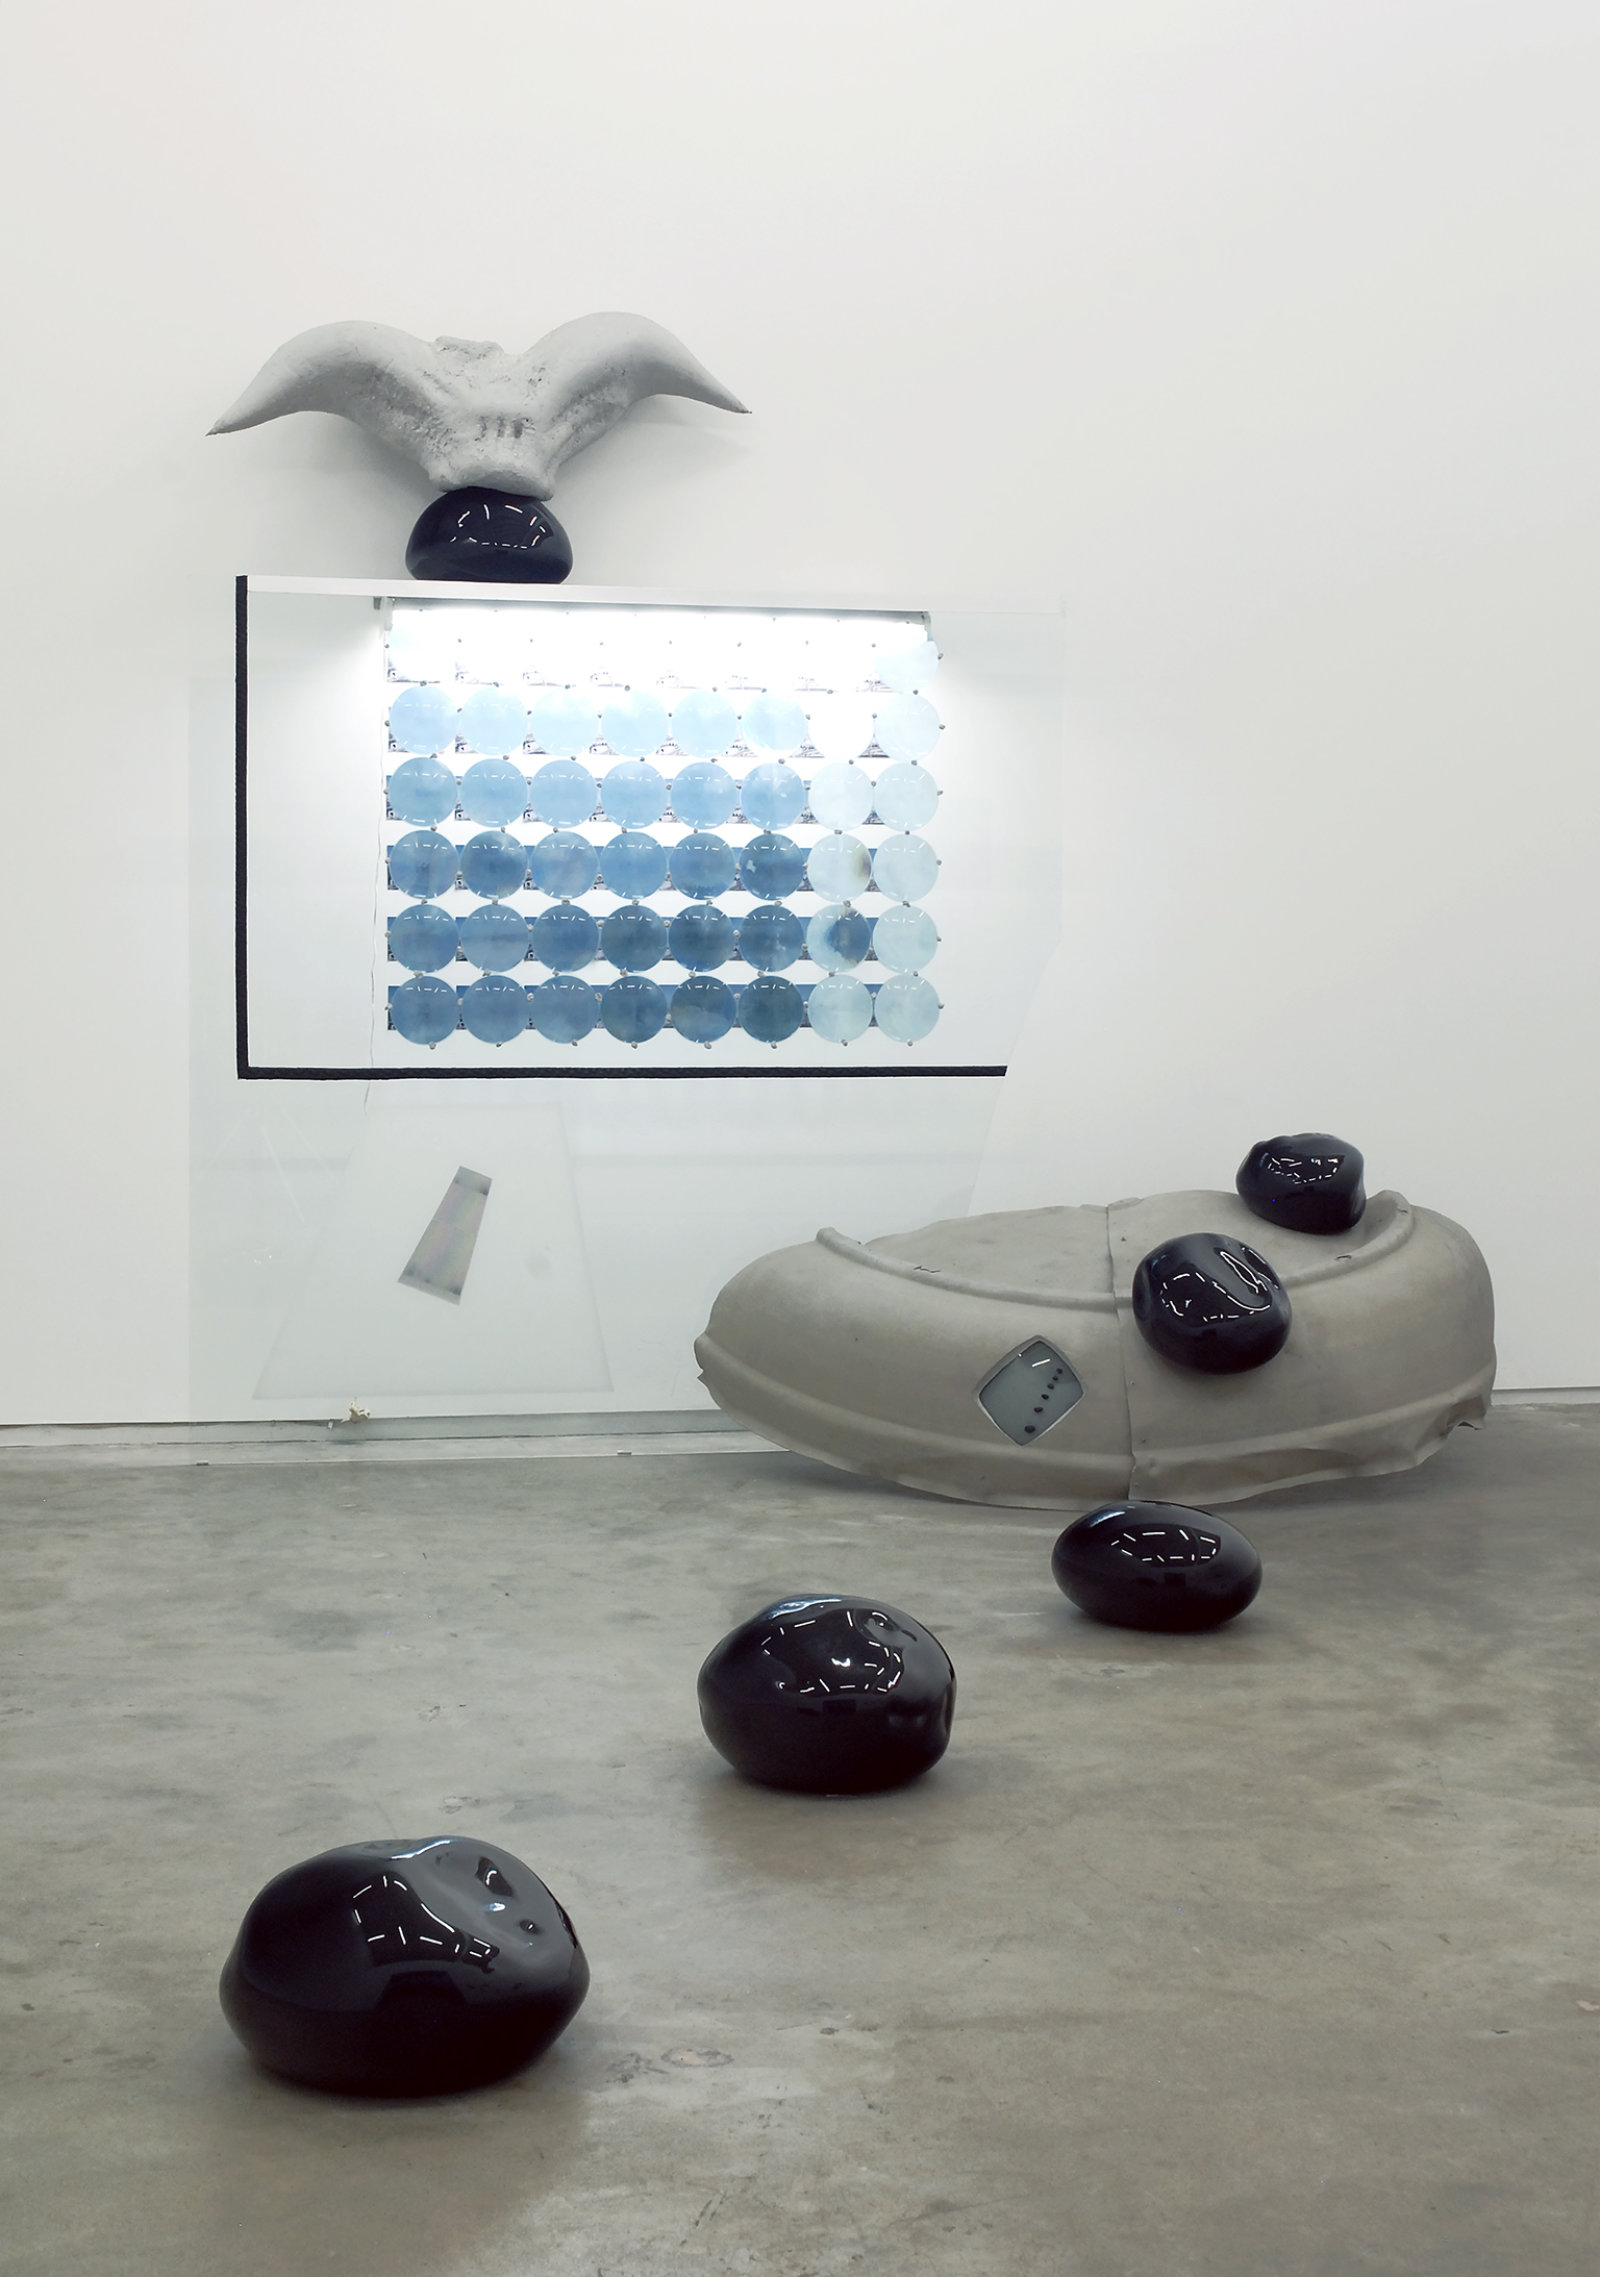 Jerry Pethick, Roof to Heaven Too, 1986–1988, blown glass, glass, rubber tire, TV tube, stones, aluminum, spectrafoil, 48 instamatic prints, 48 blue fresnel lenses, styrofoam, silicone, fluorescent light fixture, 169 x 111 x 75 in. (429 x 282 x 191 cm)